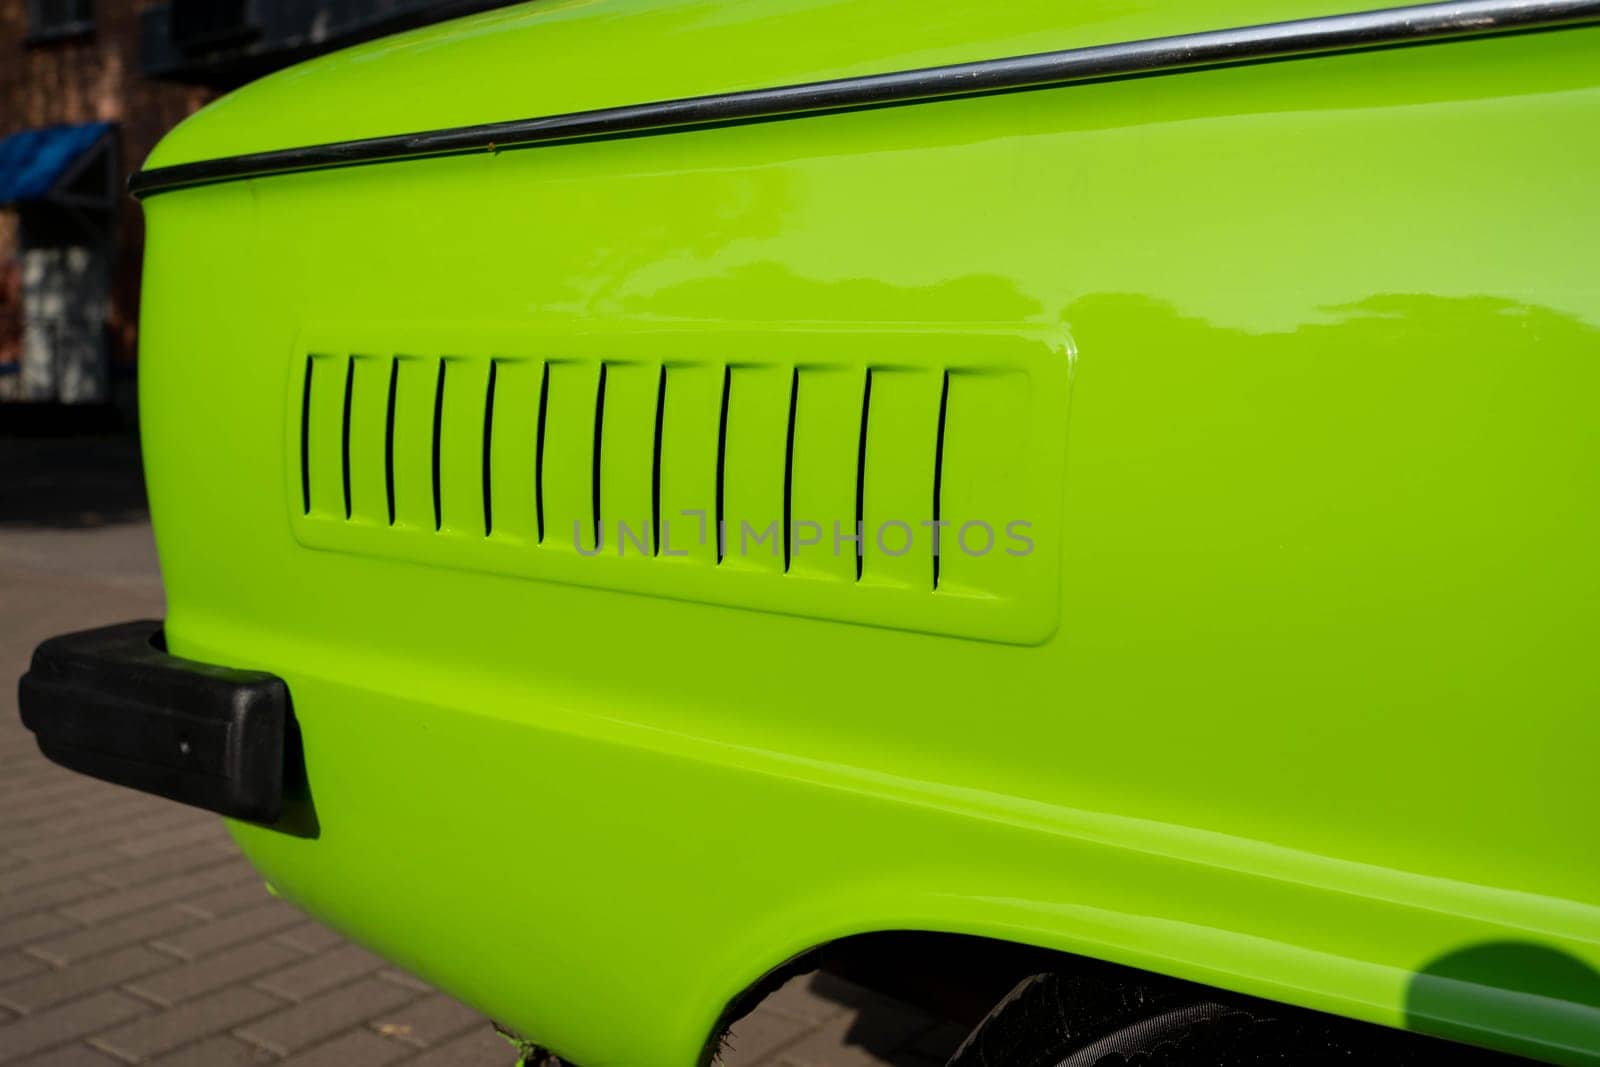 the air intake slots for the air cooling engine of the old classic car are light green. Details of retro cars. close-up and attention to detail. High quality photo